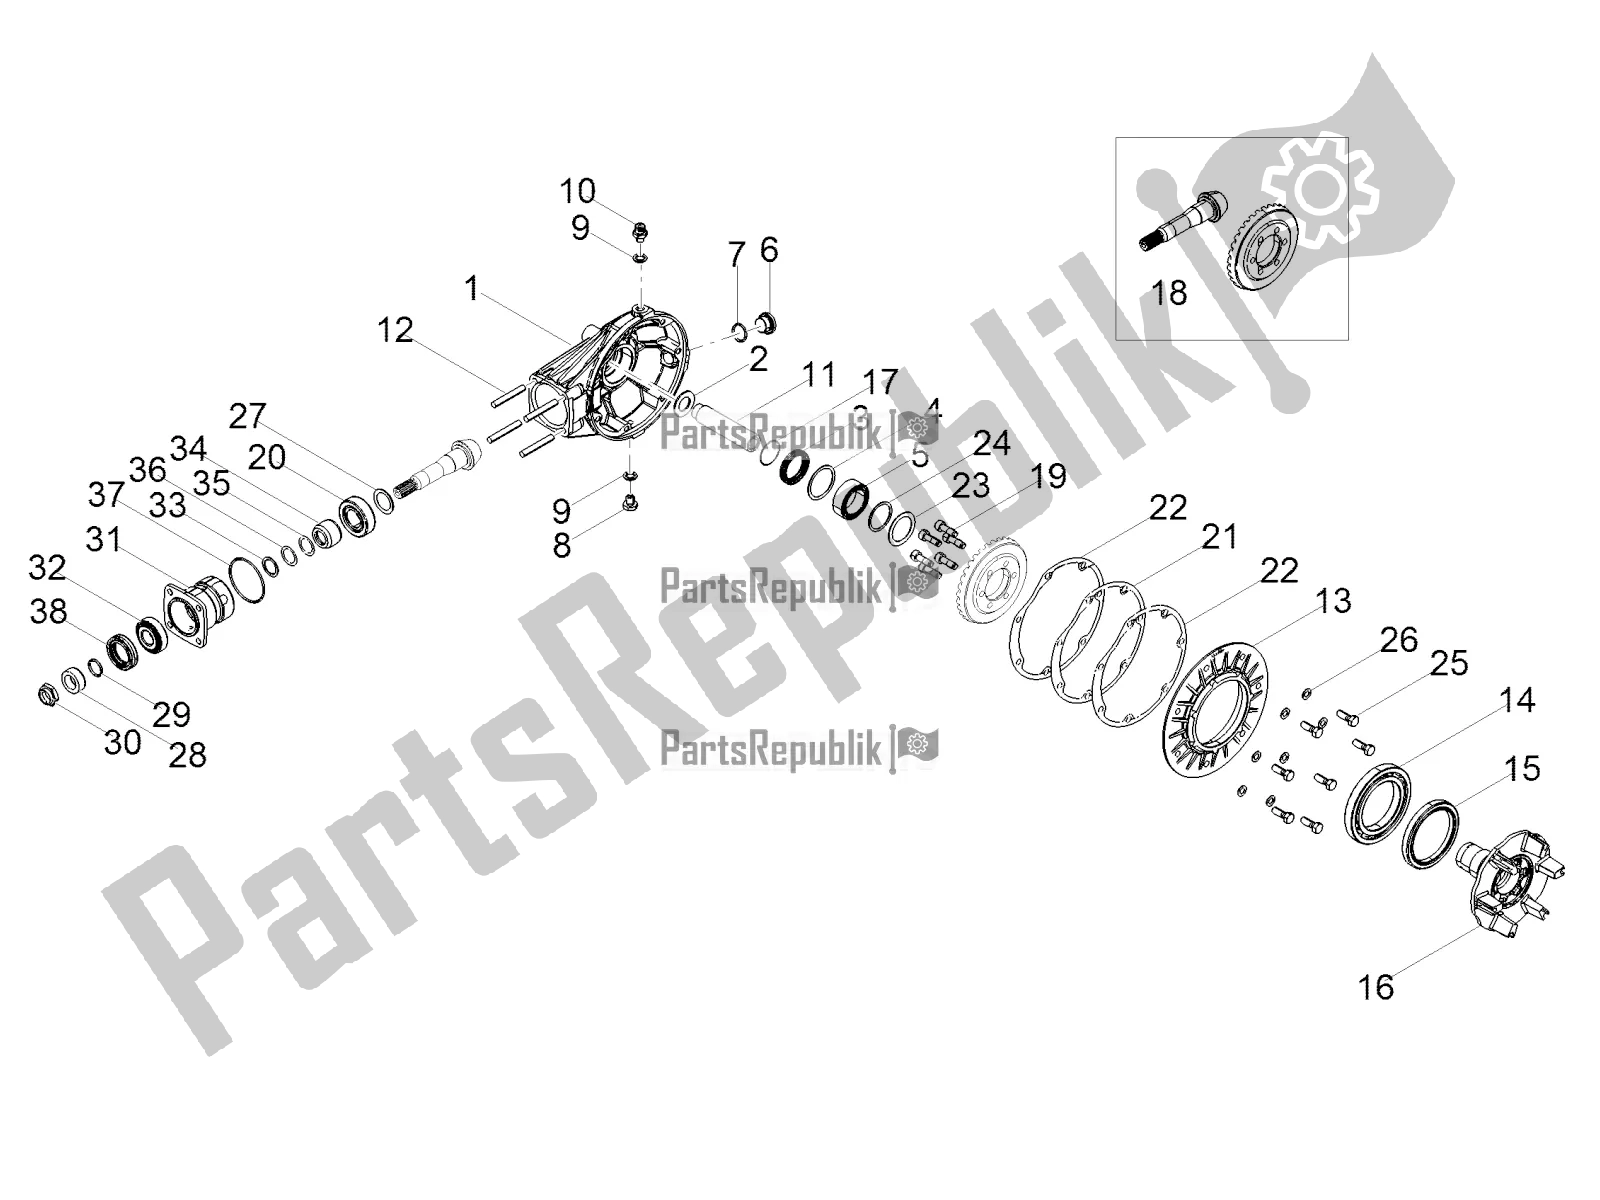 All parts for the Rear Transmission / Components of the Moto-Guzzi V7 III Rough 750 Apac 2020